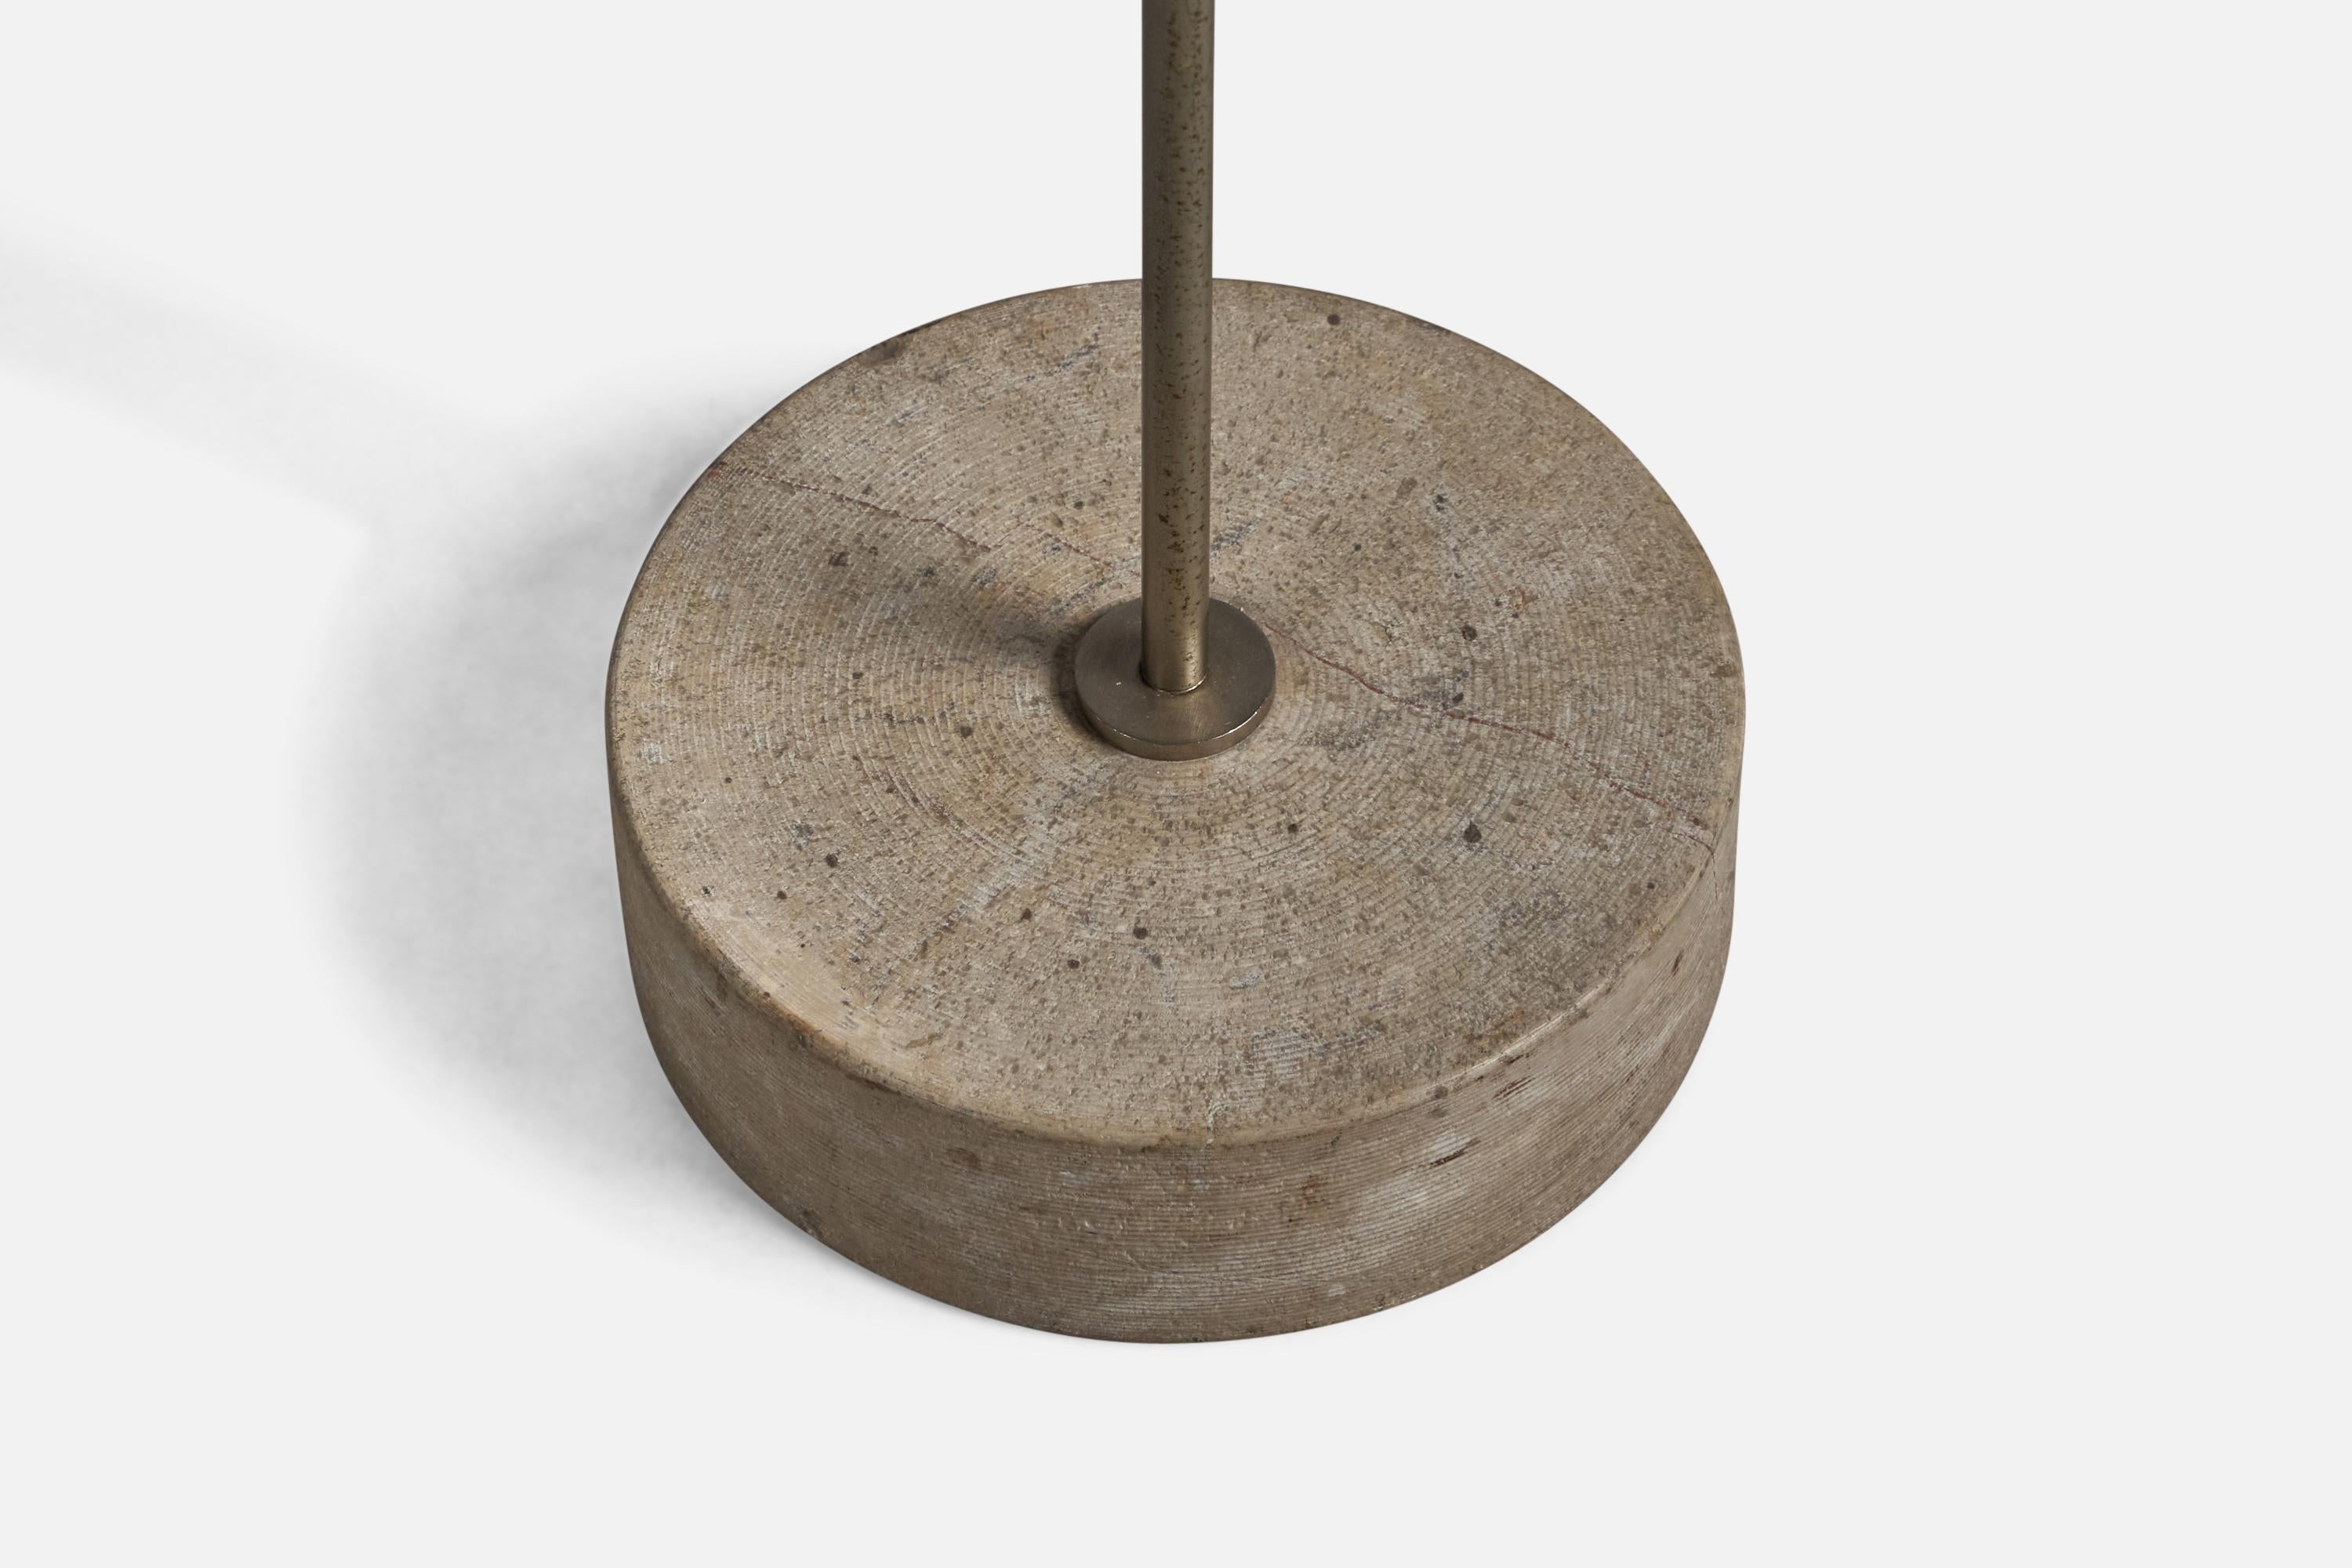 Tito Agnoli, Adjustable Floor Lamp, Steel, Metal, Stone, Italy, 1953 In Good Condition For Sale In High Point, NC